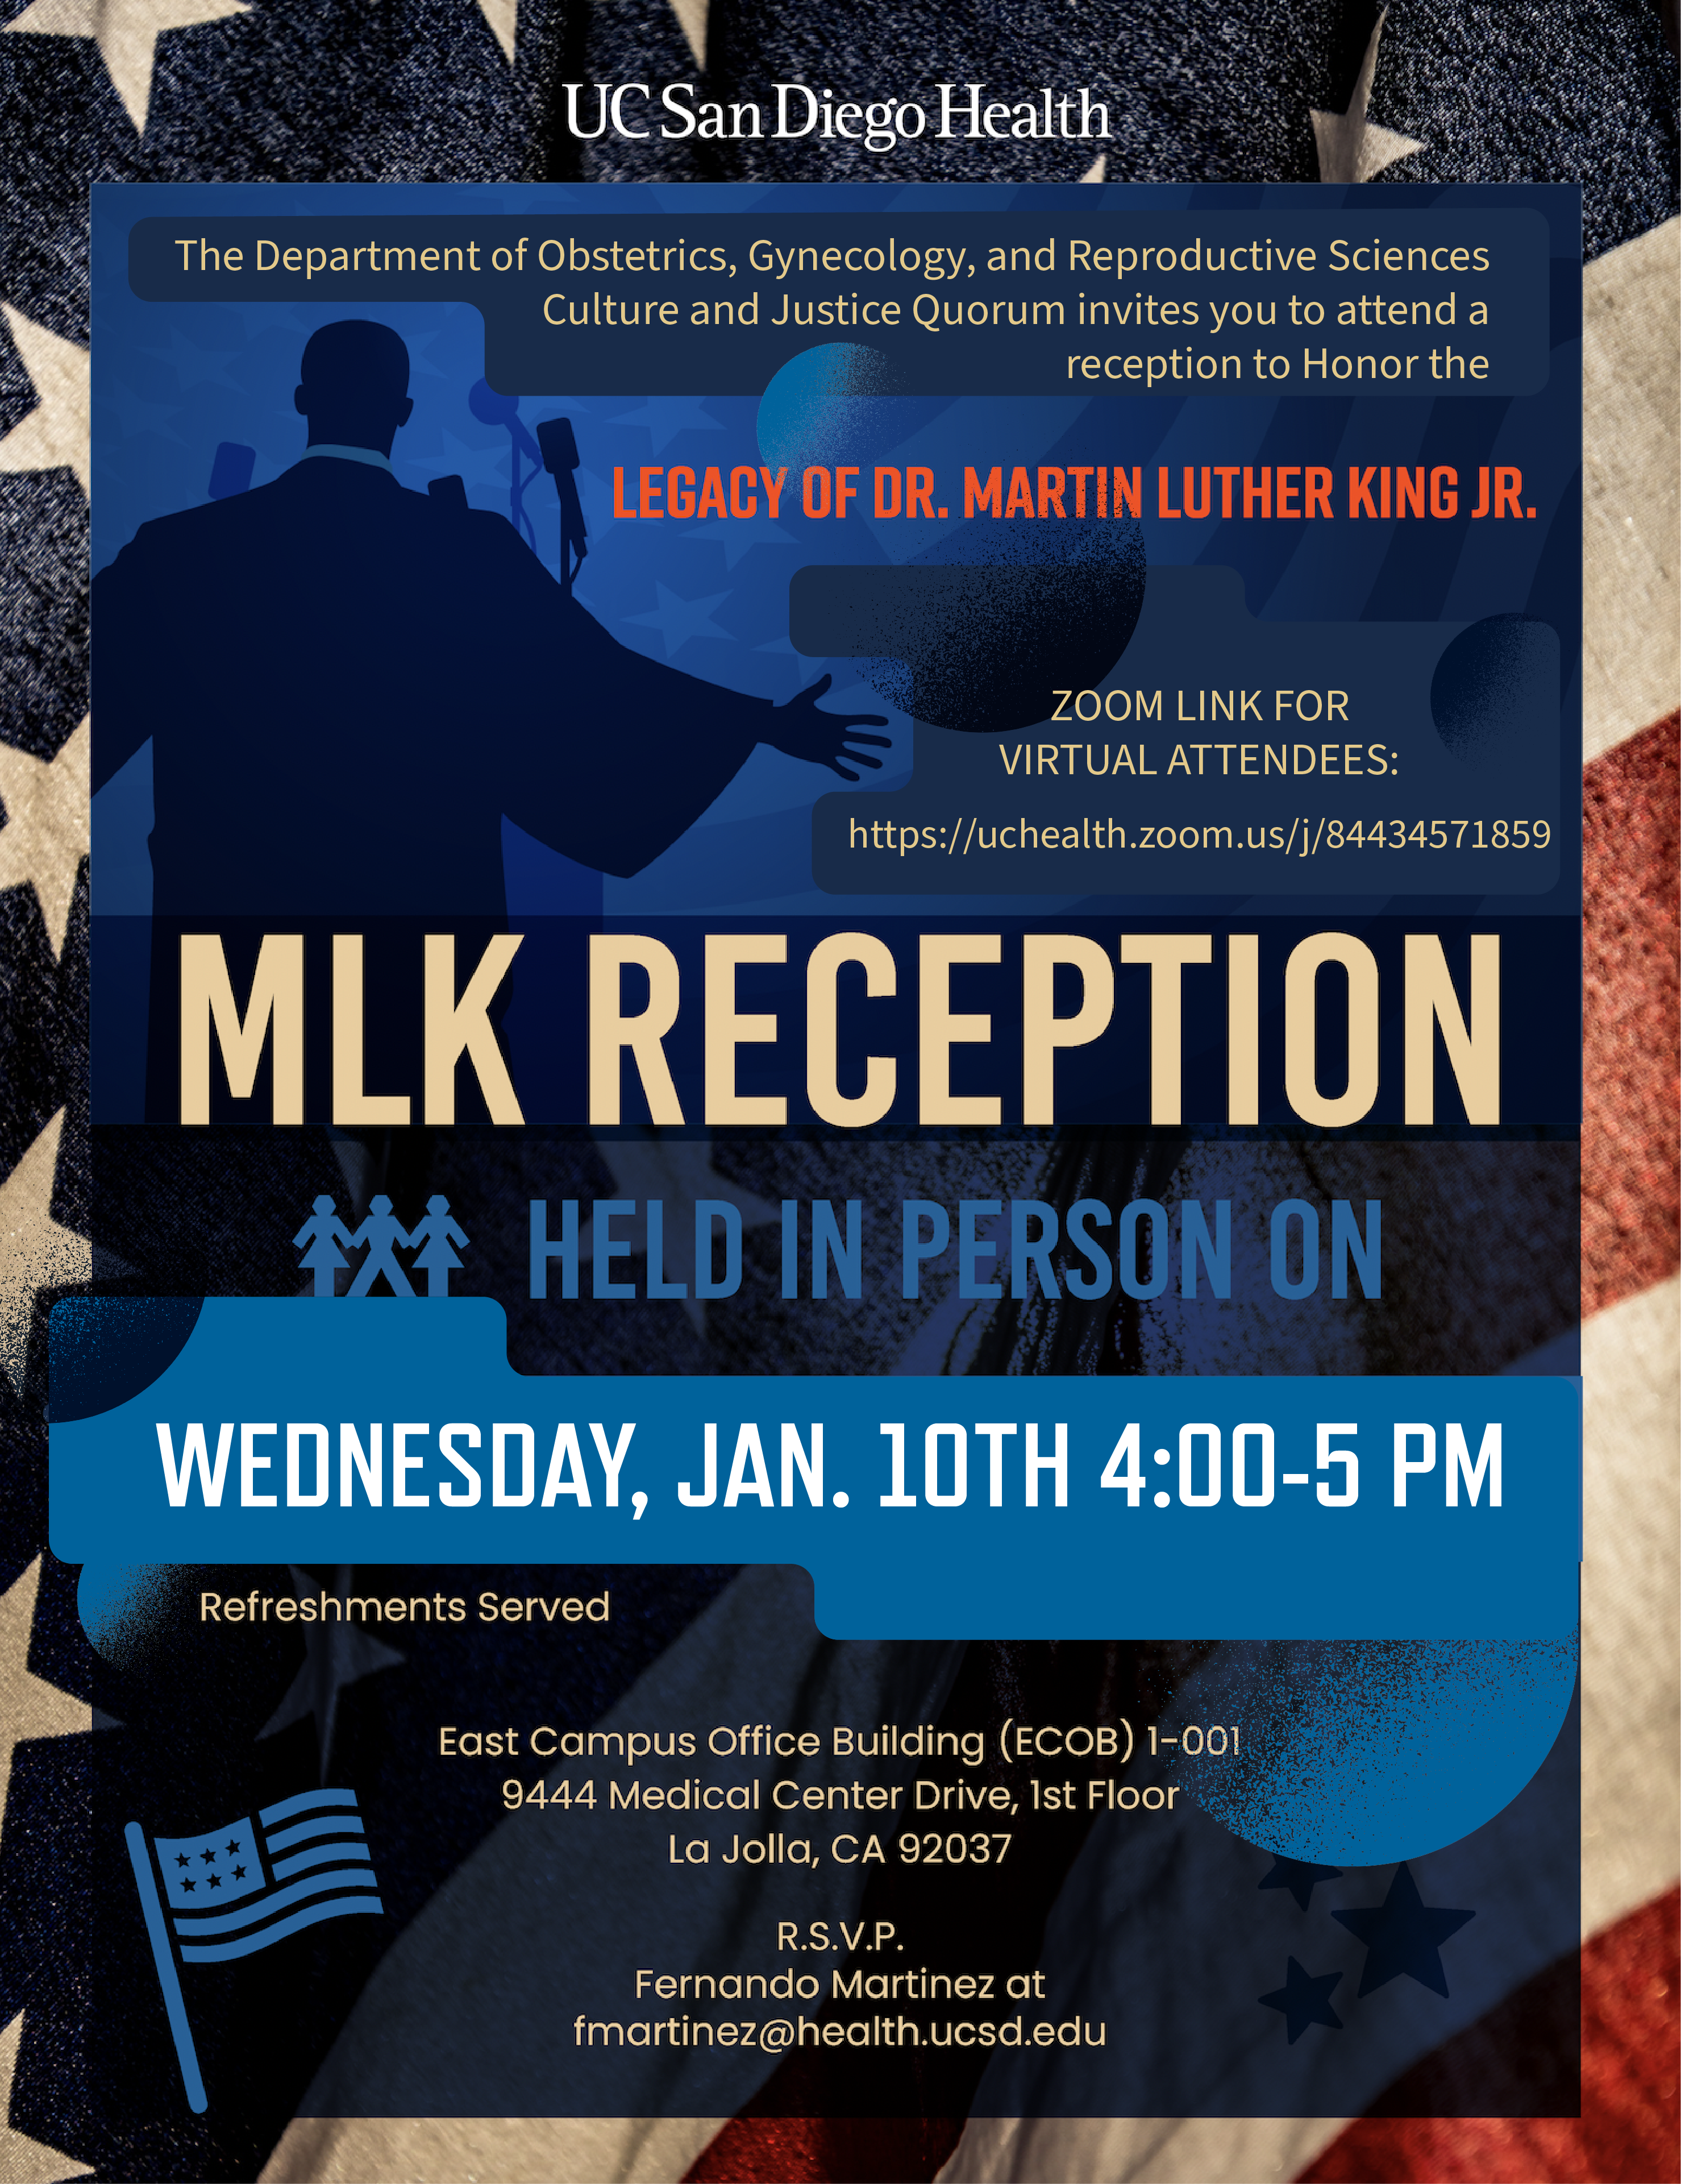 MLK Reception in honor of Dr. Martin Luther King Jr. hosted by OBGYN & RS